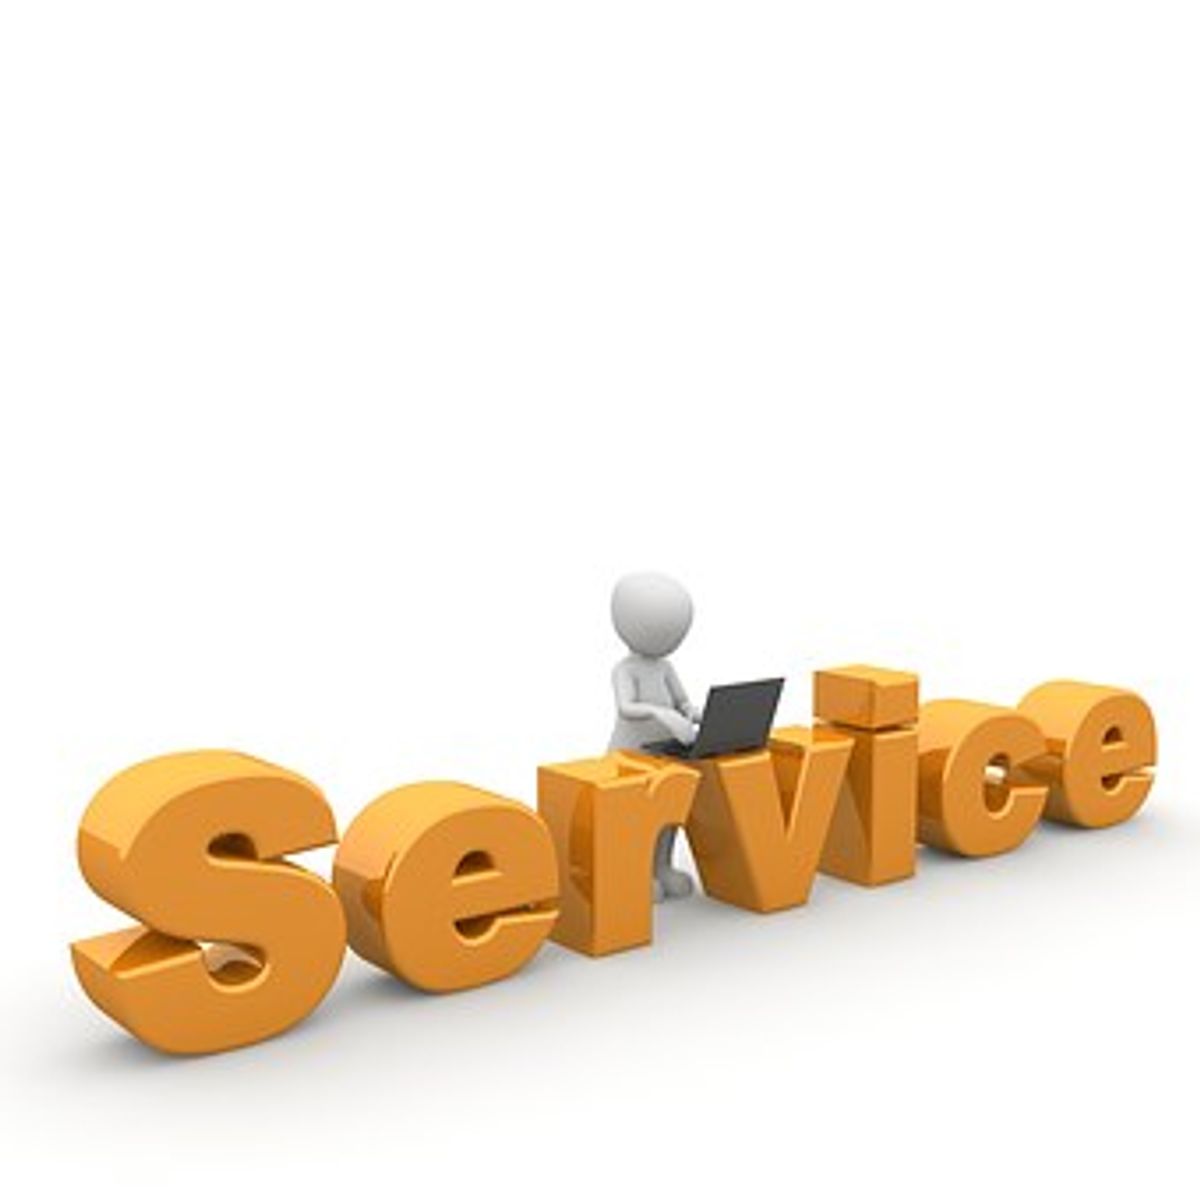 How to Develop Great Customer Service